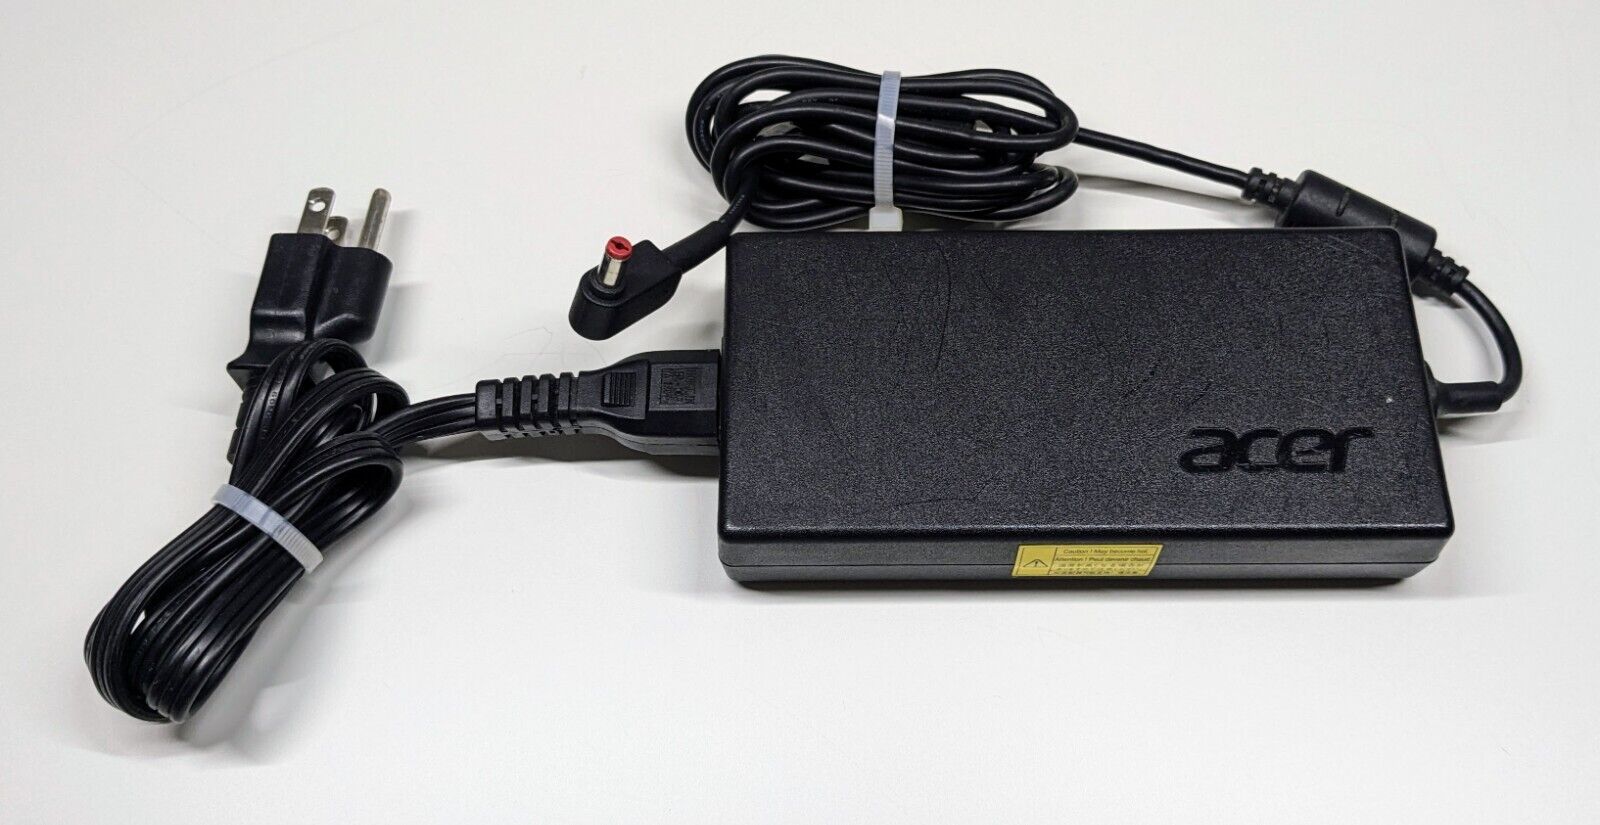 OEM Acer AC/DC Power Adapter 180W (ADP-180MB K)